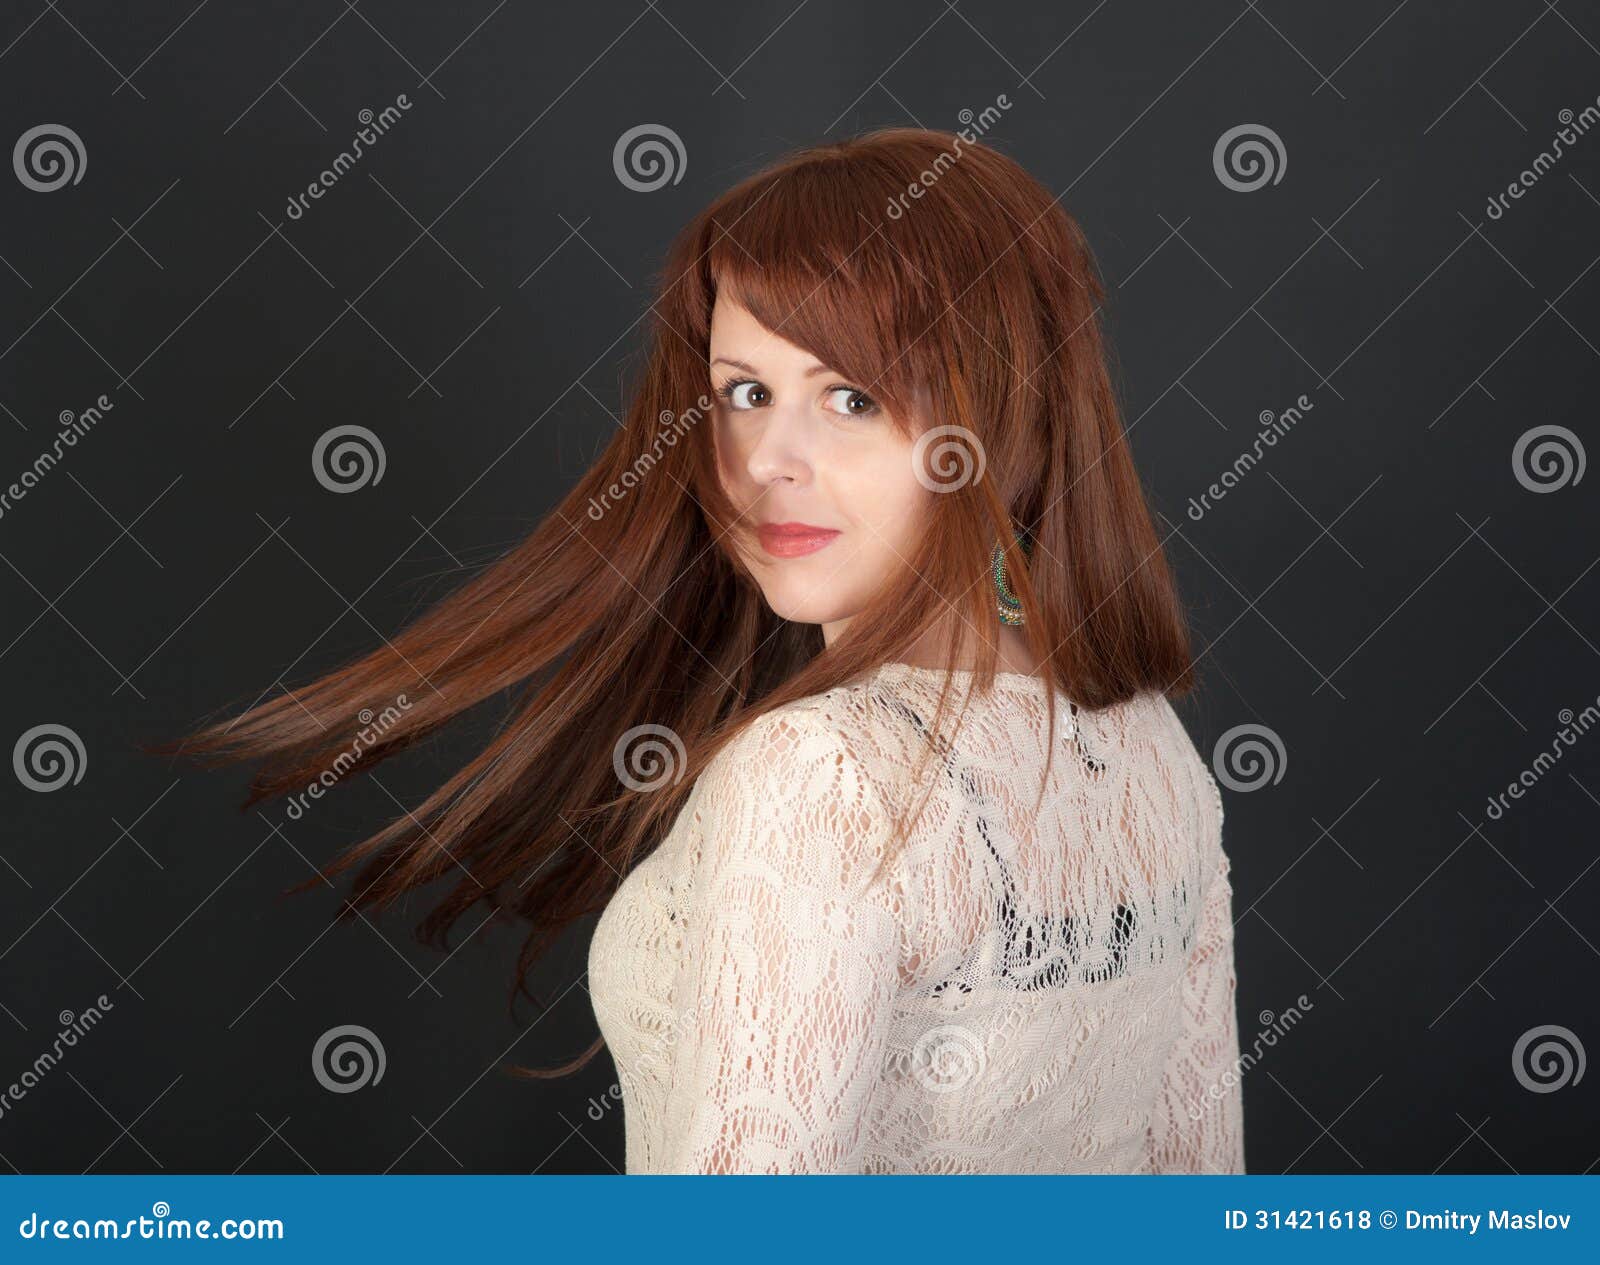 Girl with red hair stock photo. Image of person, model - 31421618